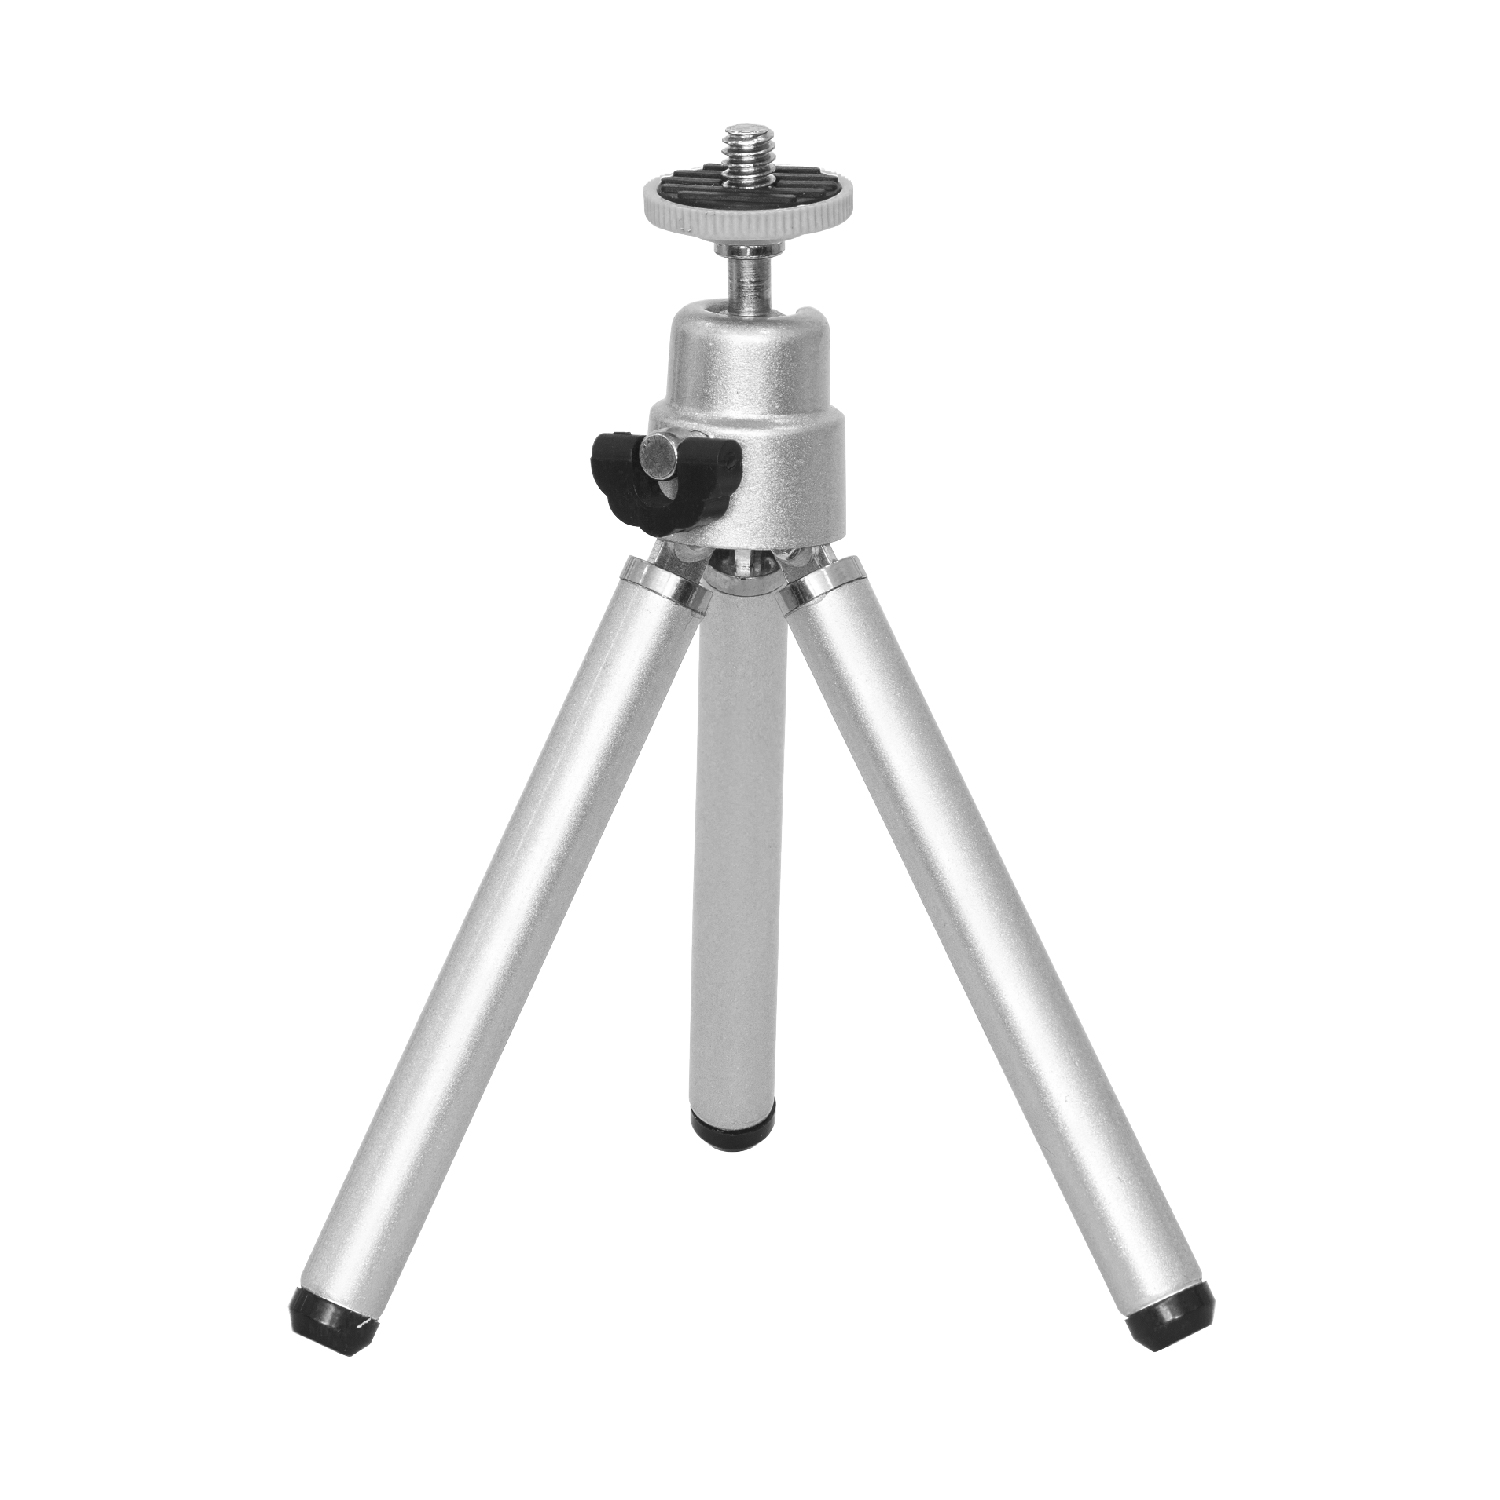 Arducam Lightweight Adjustable Mini Tripod Stand with Rotation